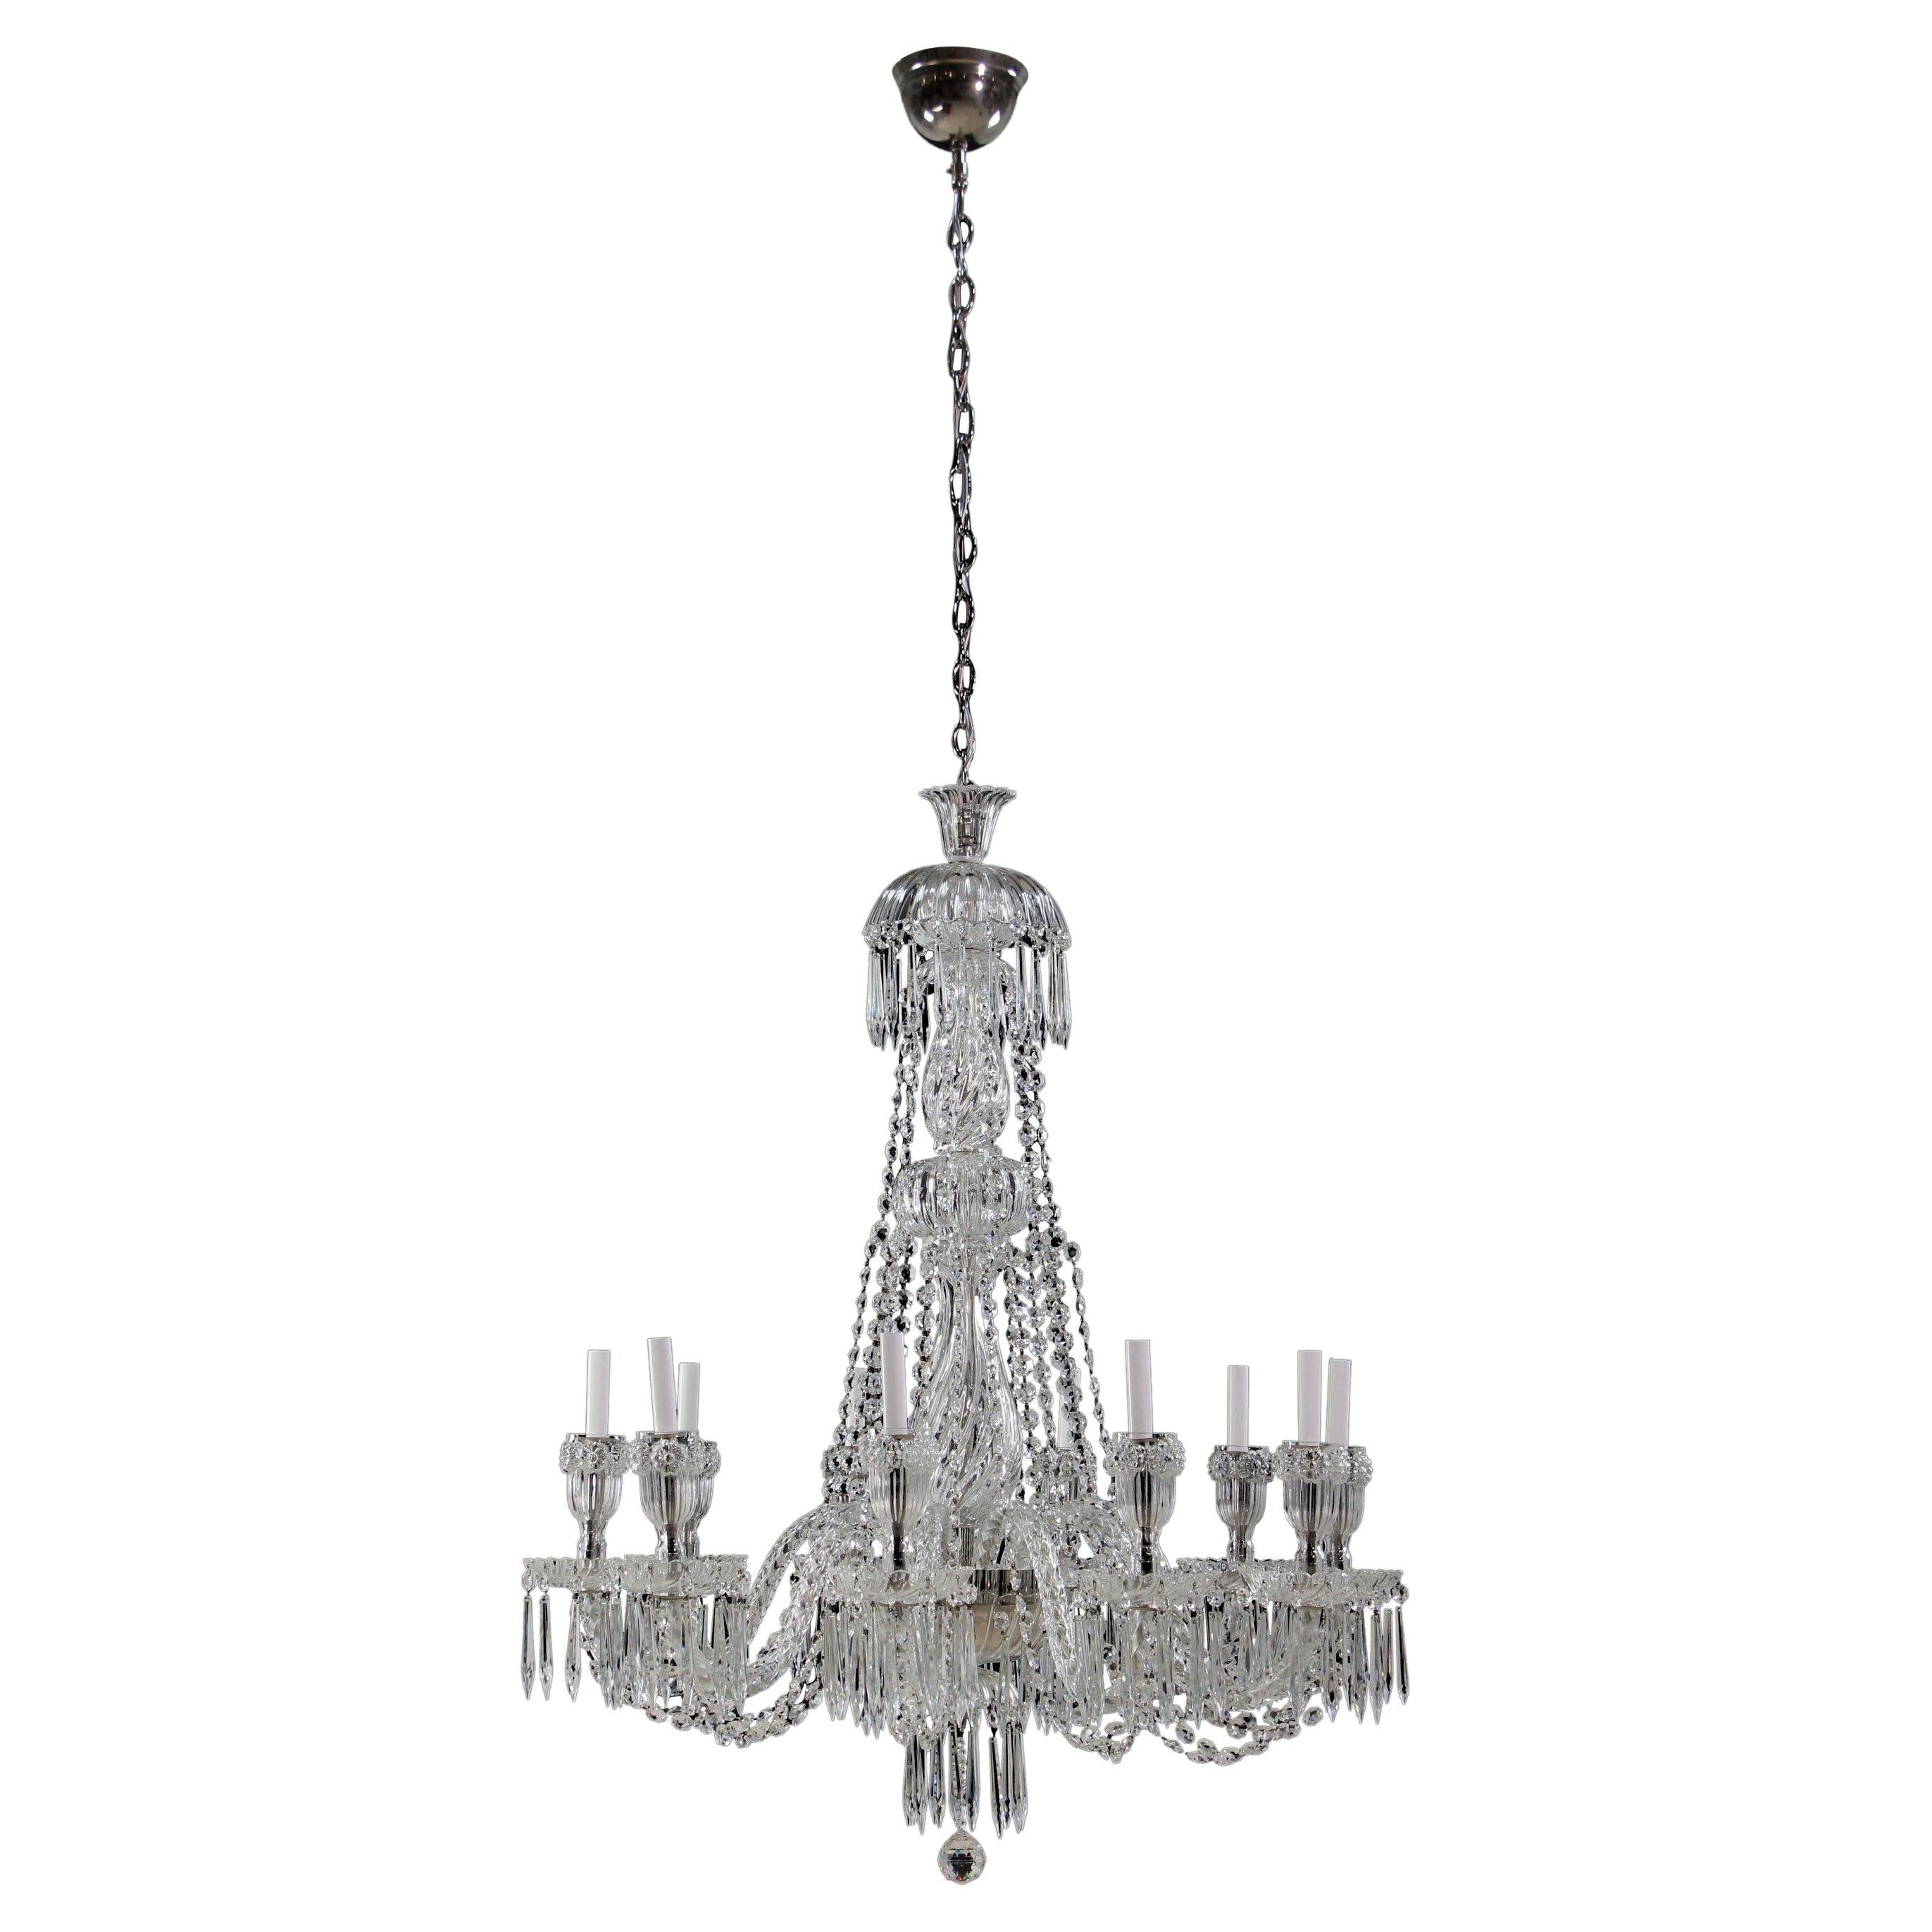 Heavily Draped Crystal Chandelier 12 Light Braided Arms For Sale